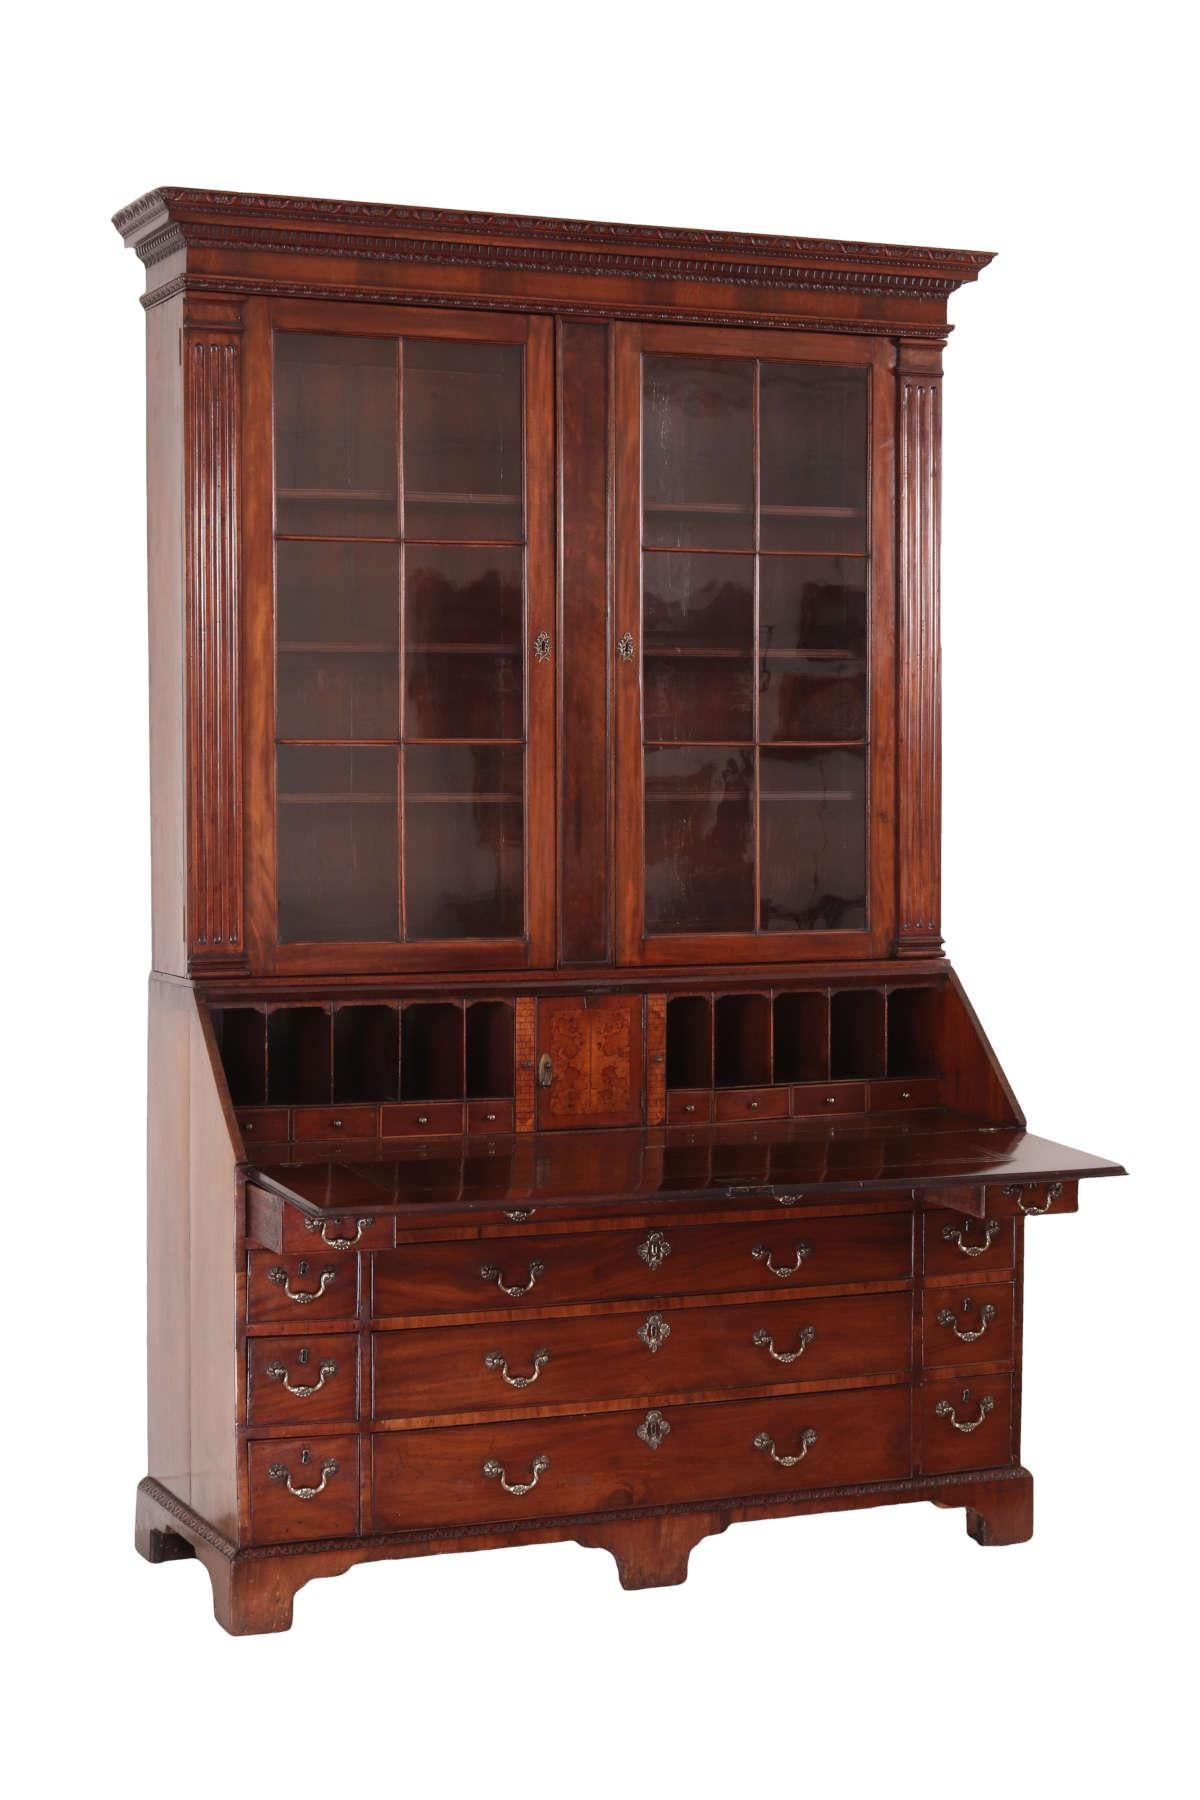 Large Irish George III mahogany secretary bookcase, the upper portion with an elaborate cornice carved with trailing shells, dentils and foliate moldings. The glazed doors with engaged fluted pilasters open to three fixed shelves. The desk portion